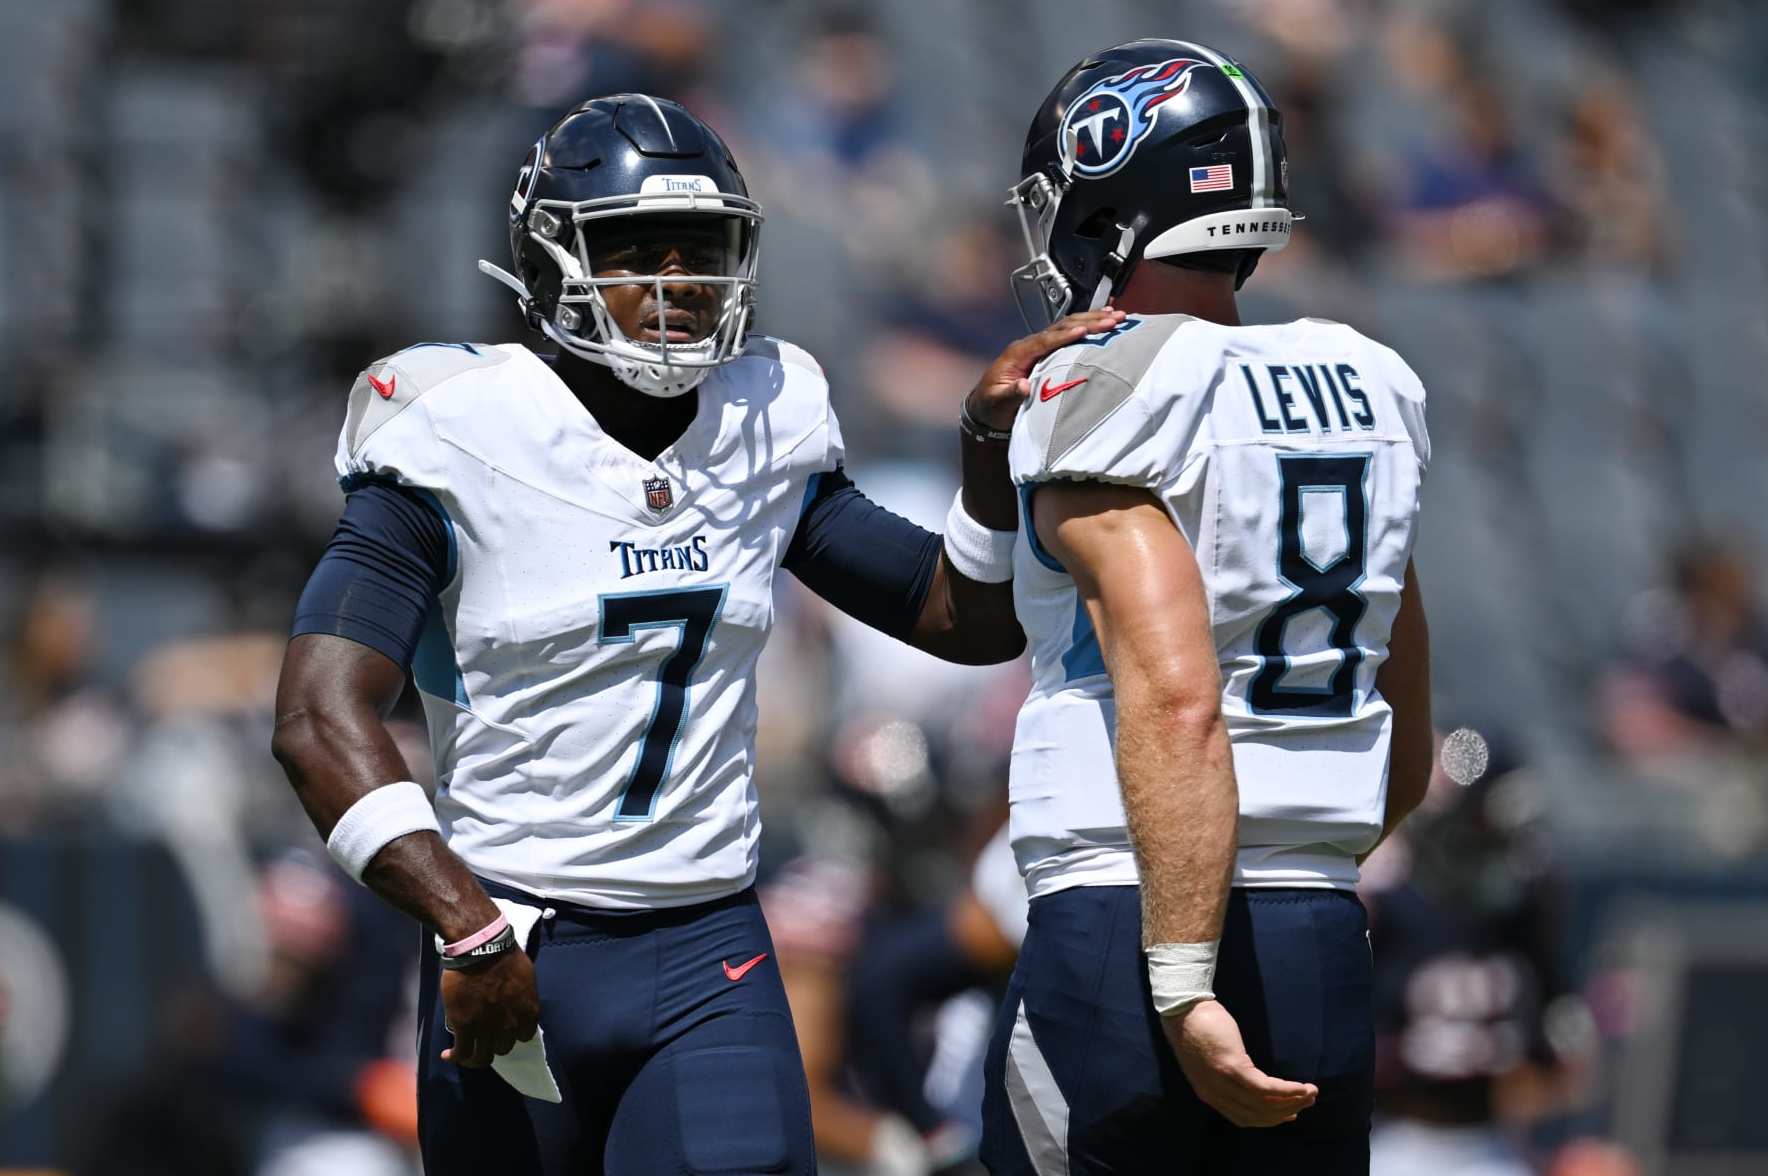 Don't count on the Titans wearing throwback Oilers uniforms any